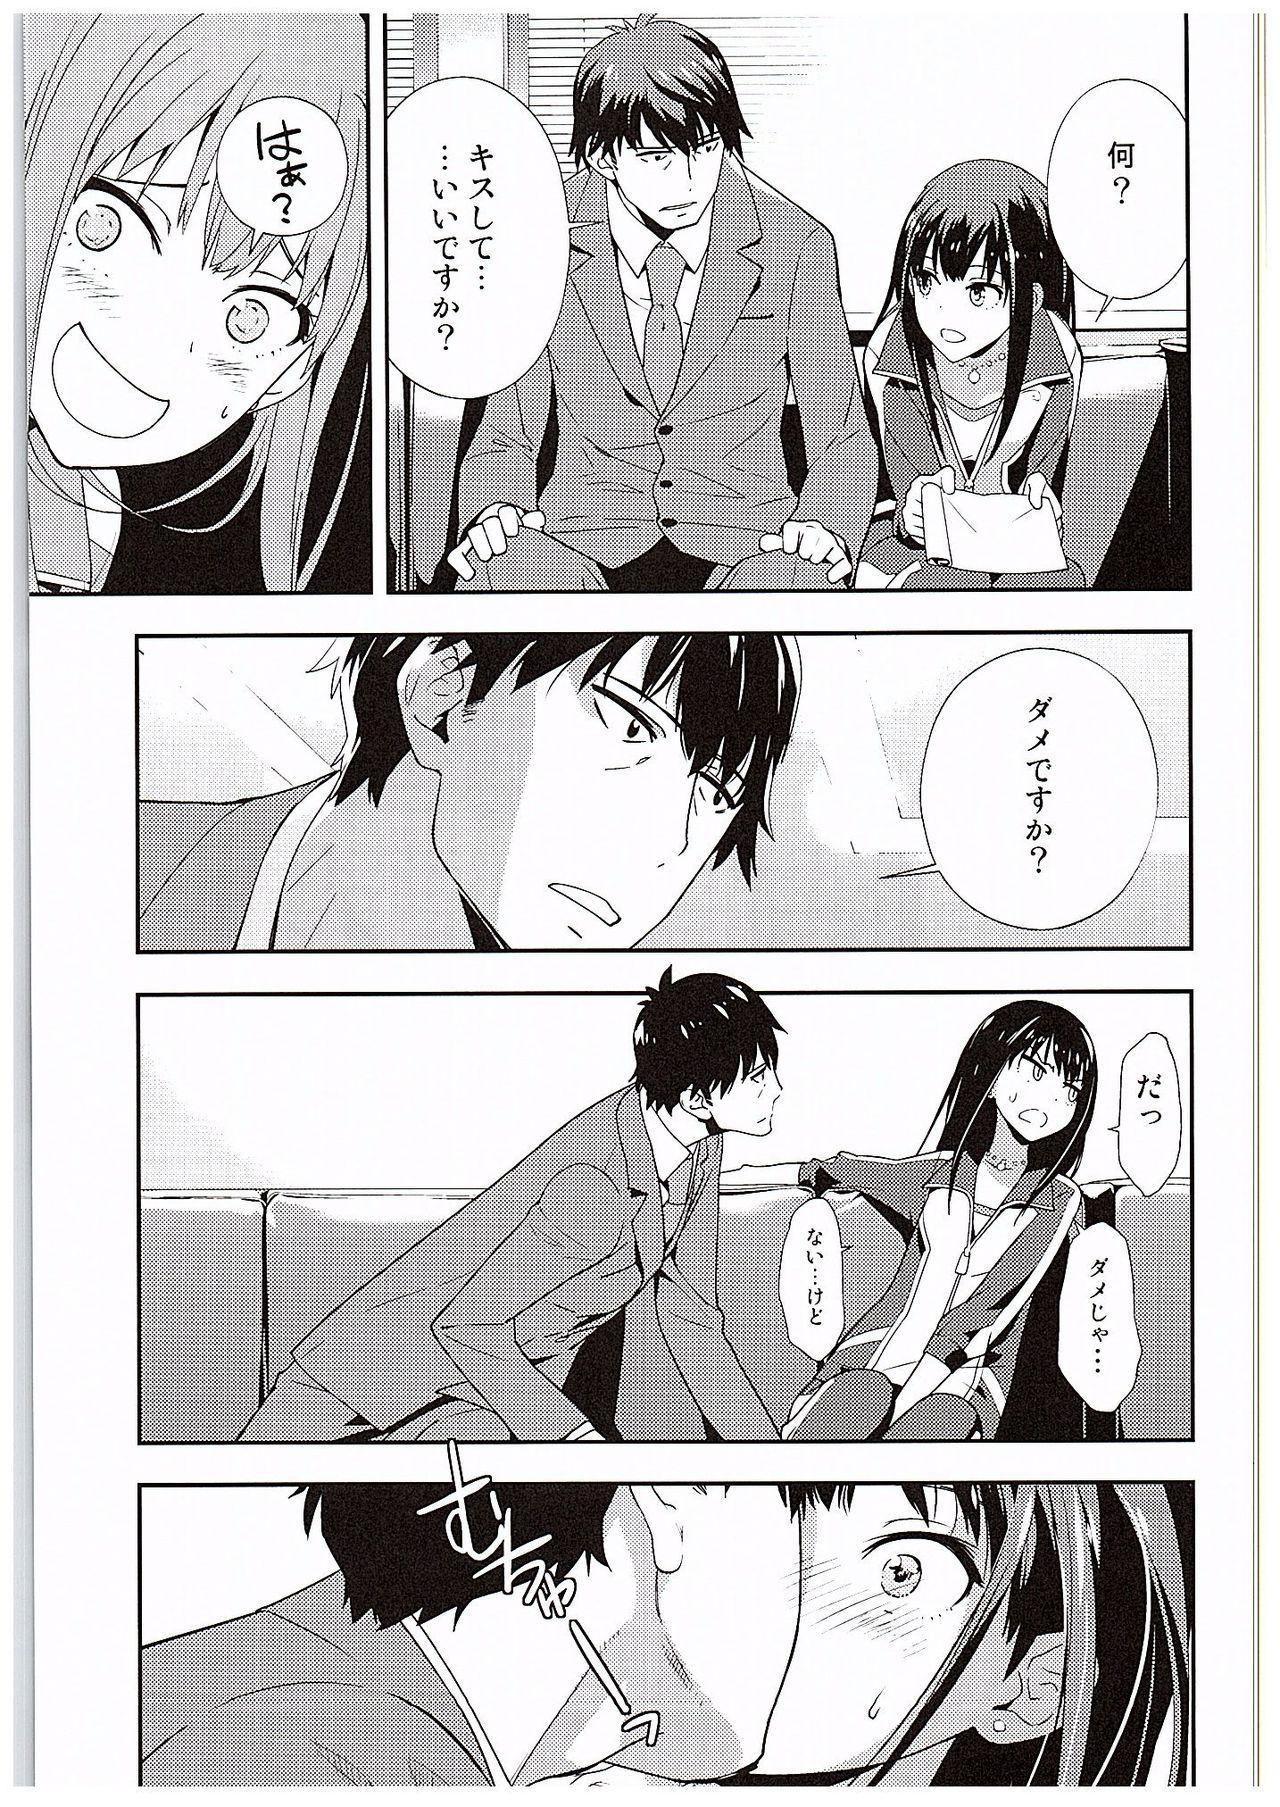 Ngentot B-side - The idolmaster Romance - Page 10